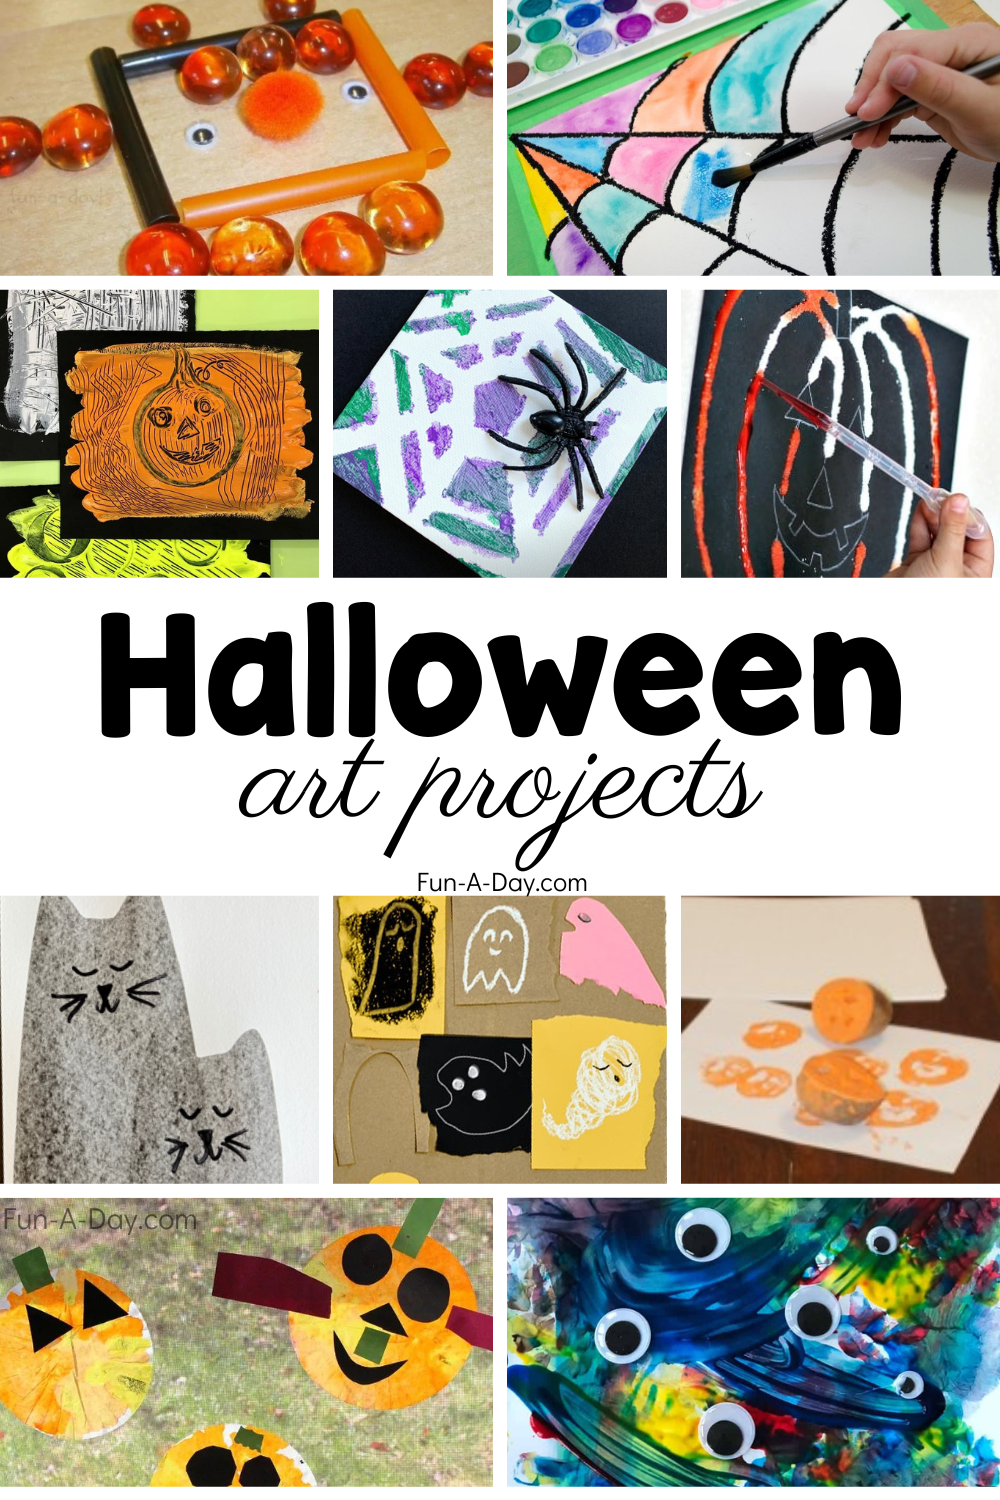 Preschool art project ideas with text that reads Halloween art projects.